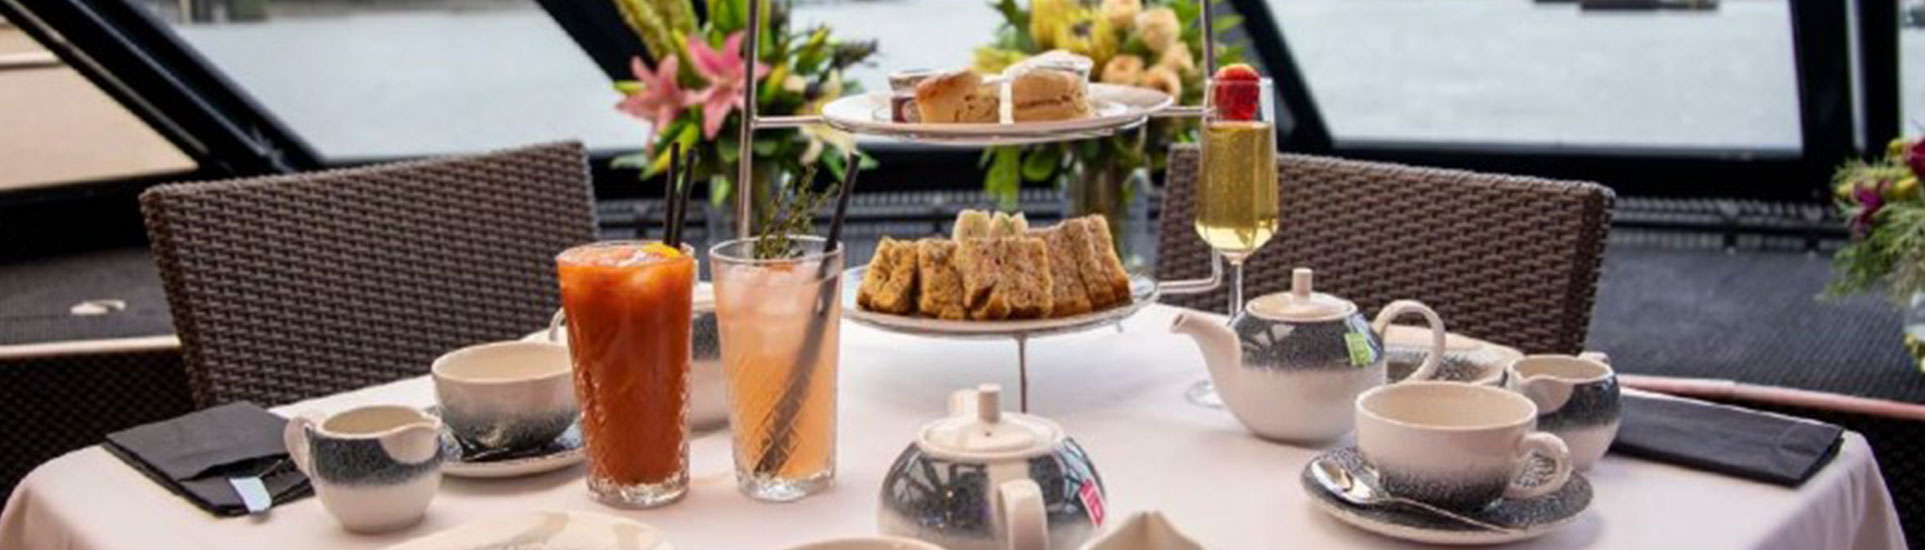 tourhub | Just Go Holidays | Afternoon Tea Cruise on the River Thames & London 